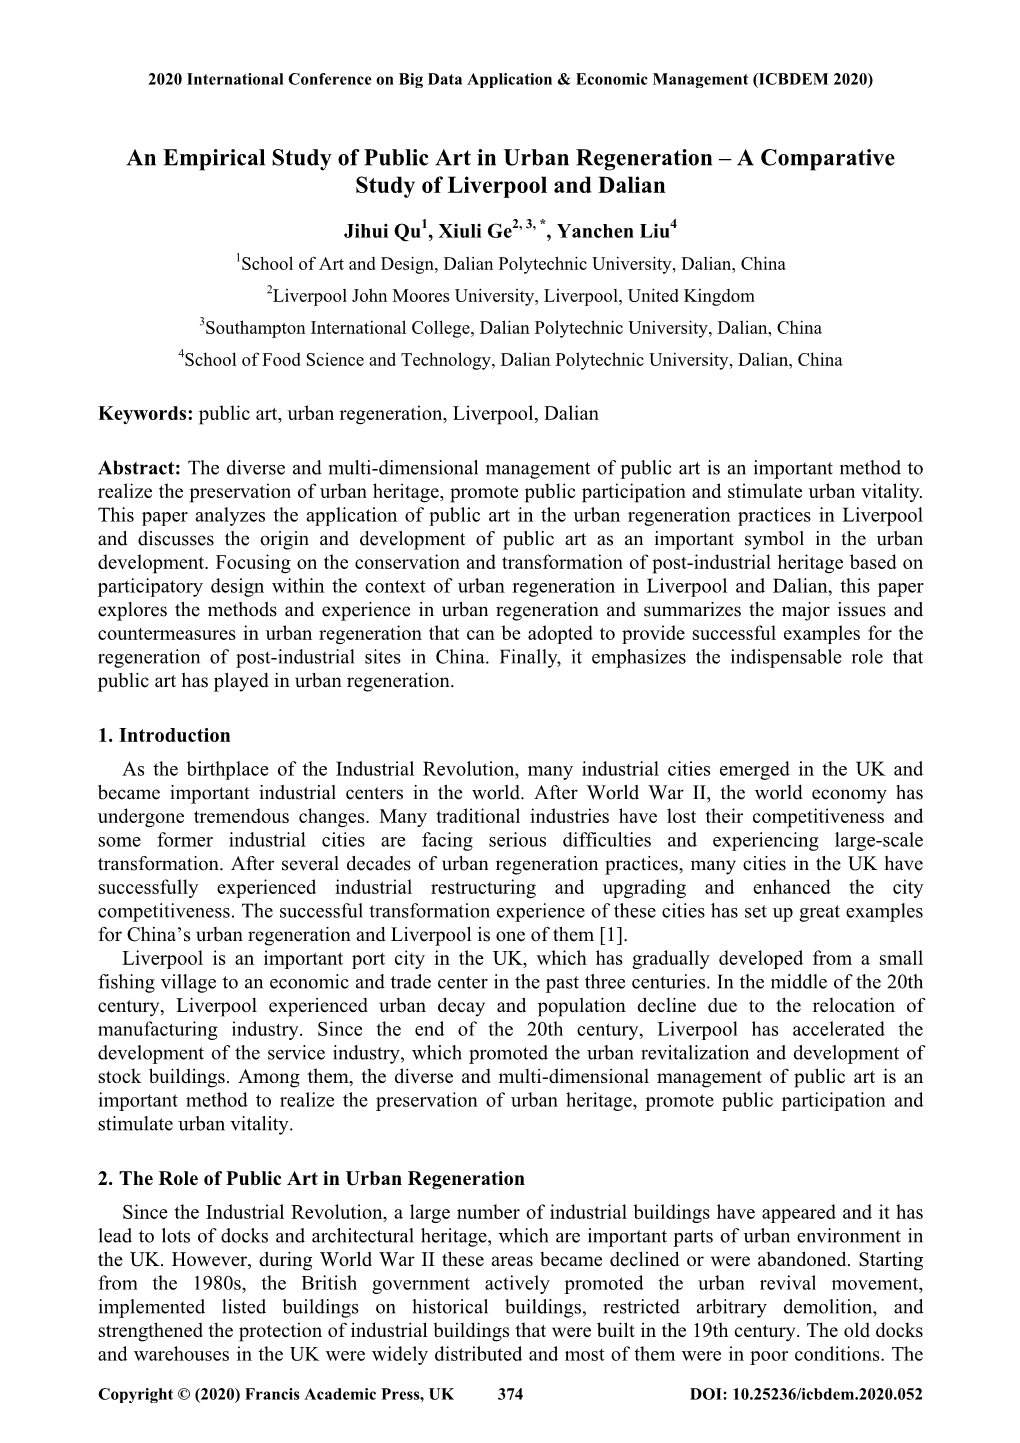 An Empirical Study of Public Art in Urban Regeneration – a Comparative Study of Liverpool and Dalian